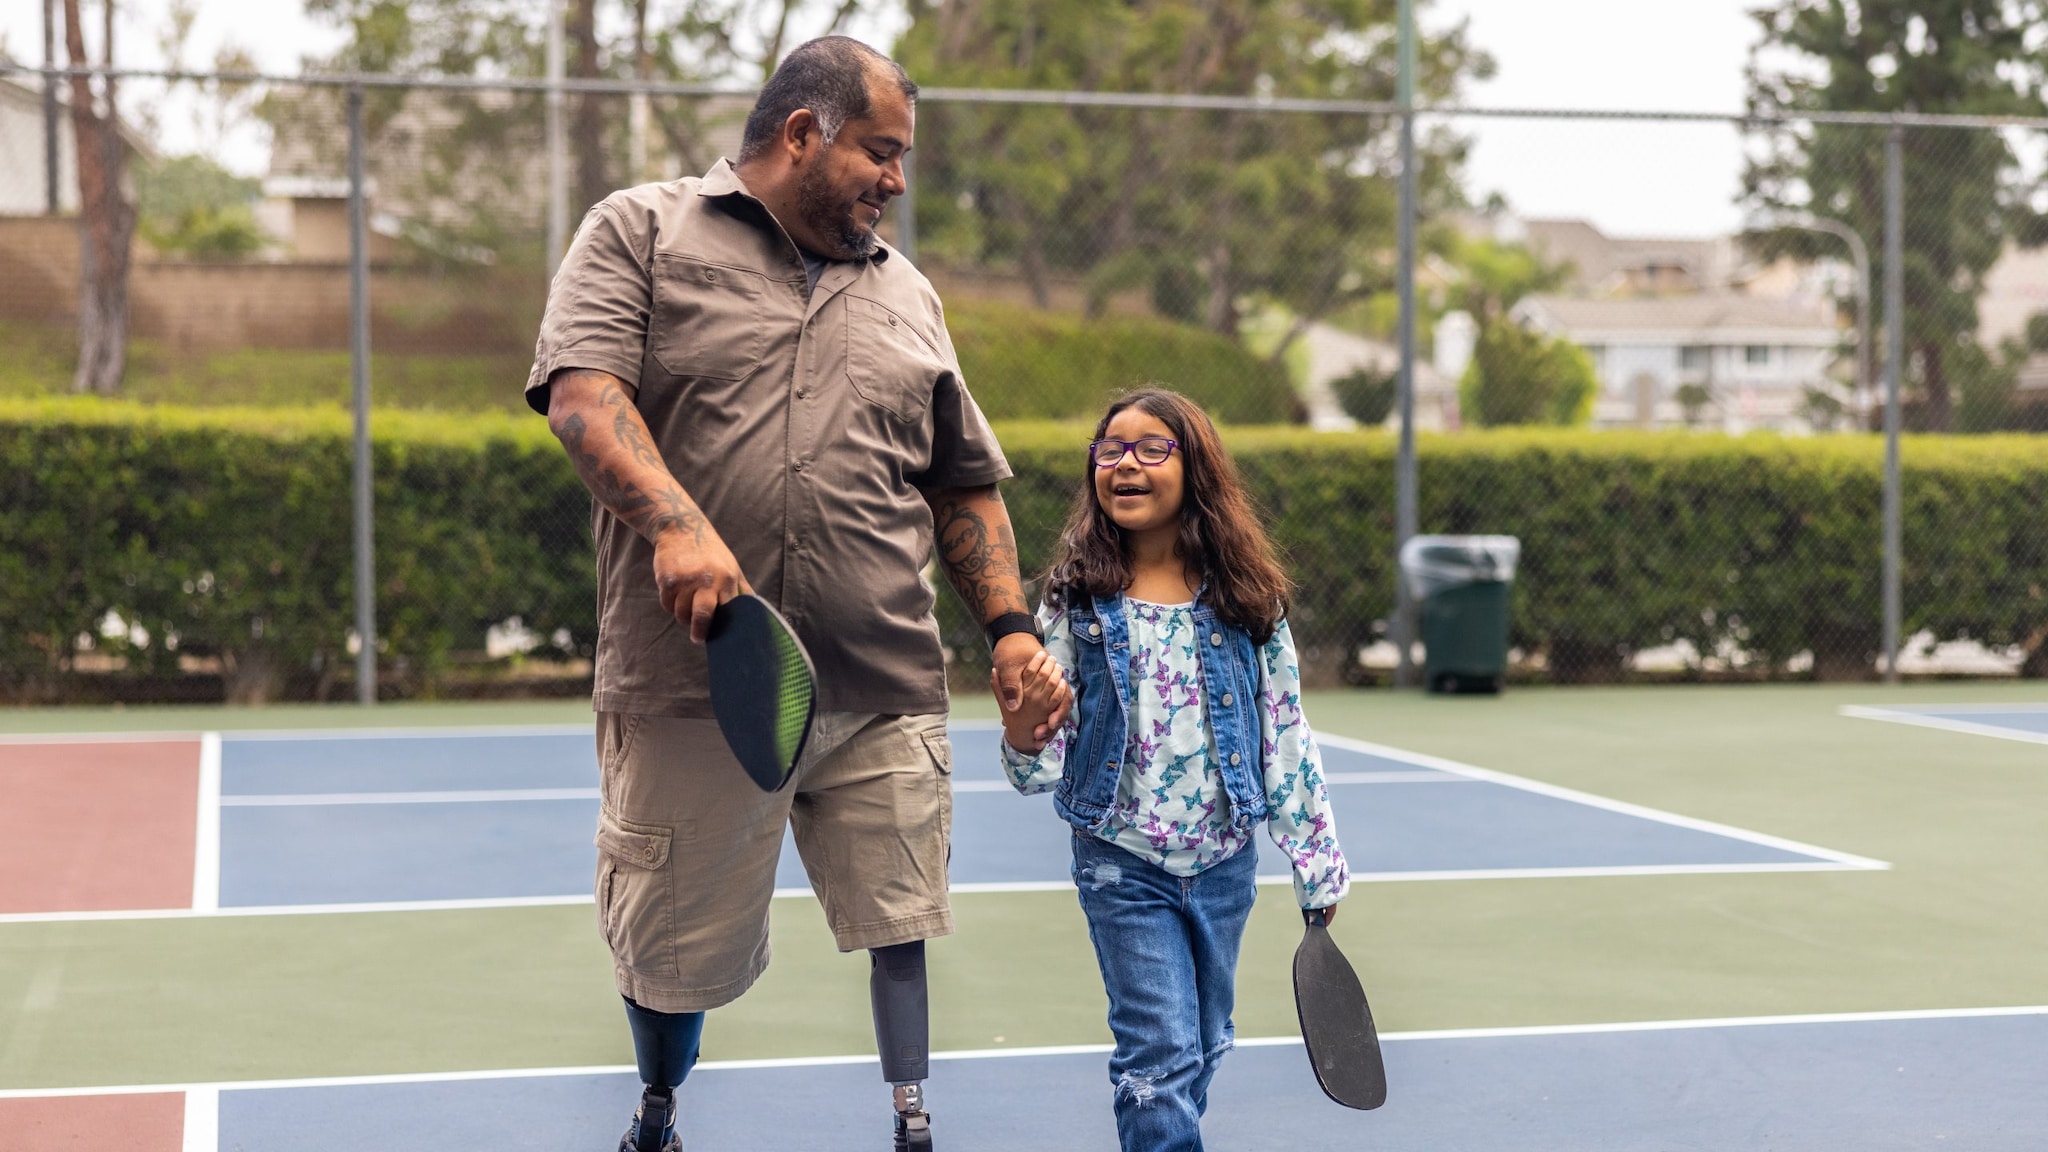 Father with prosthetic legs and daughter on pickleball court.